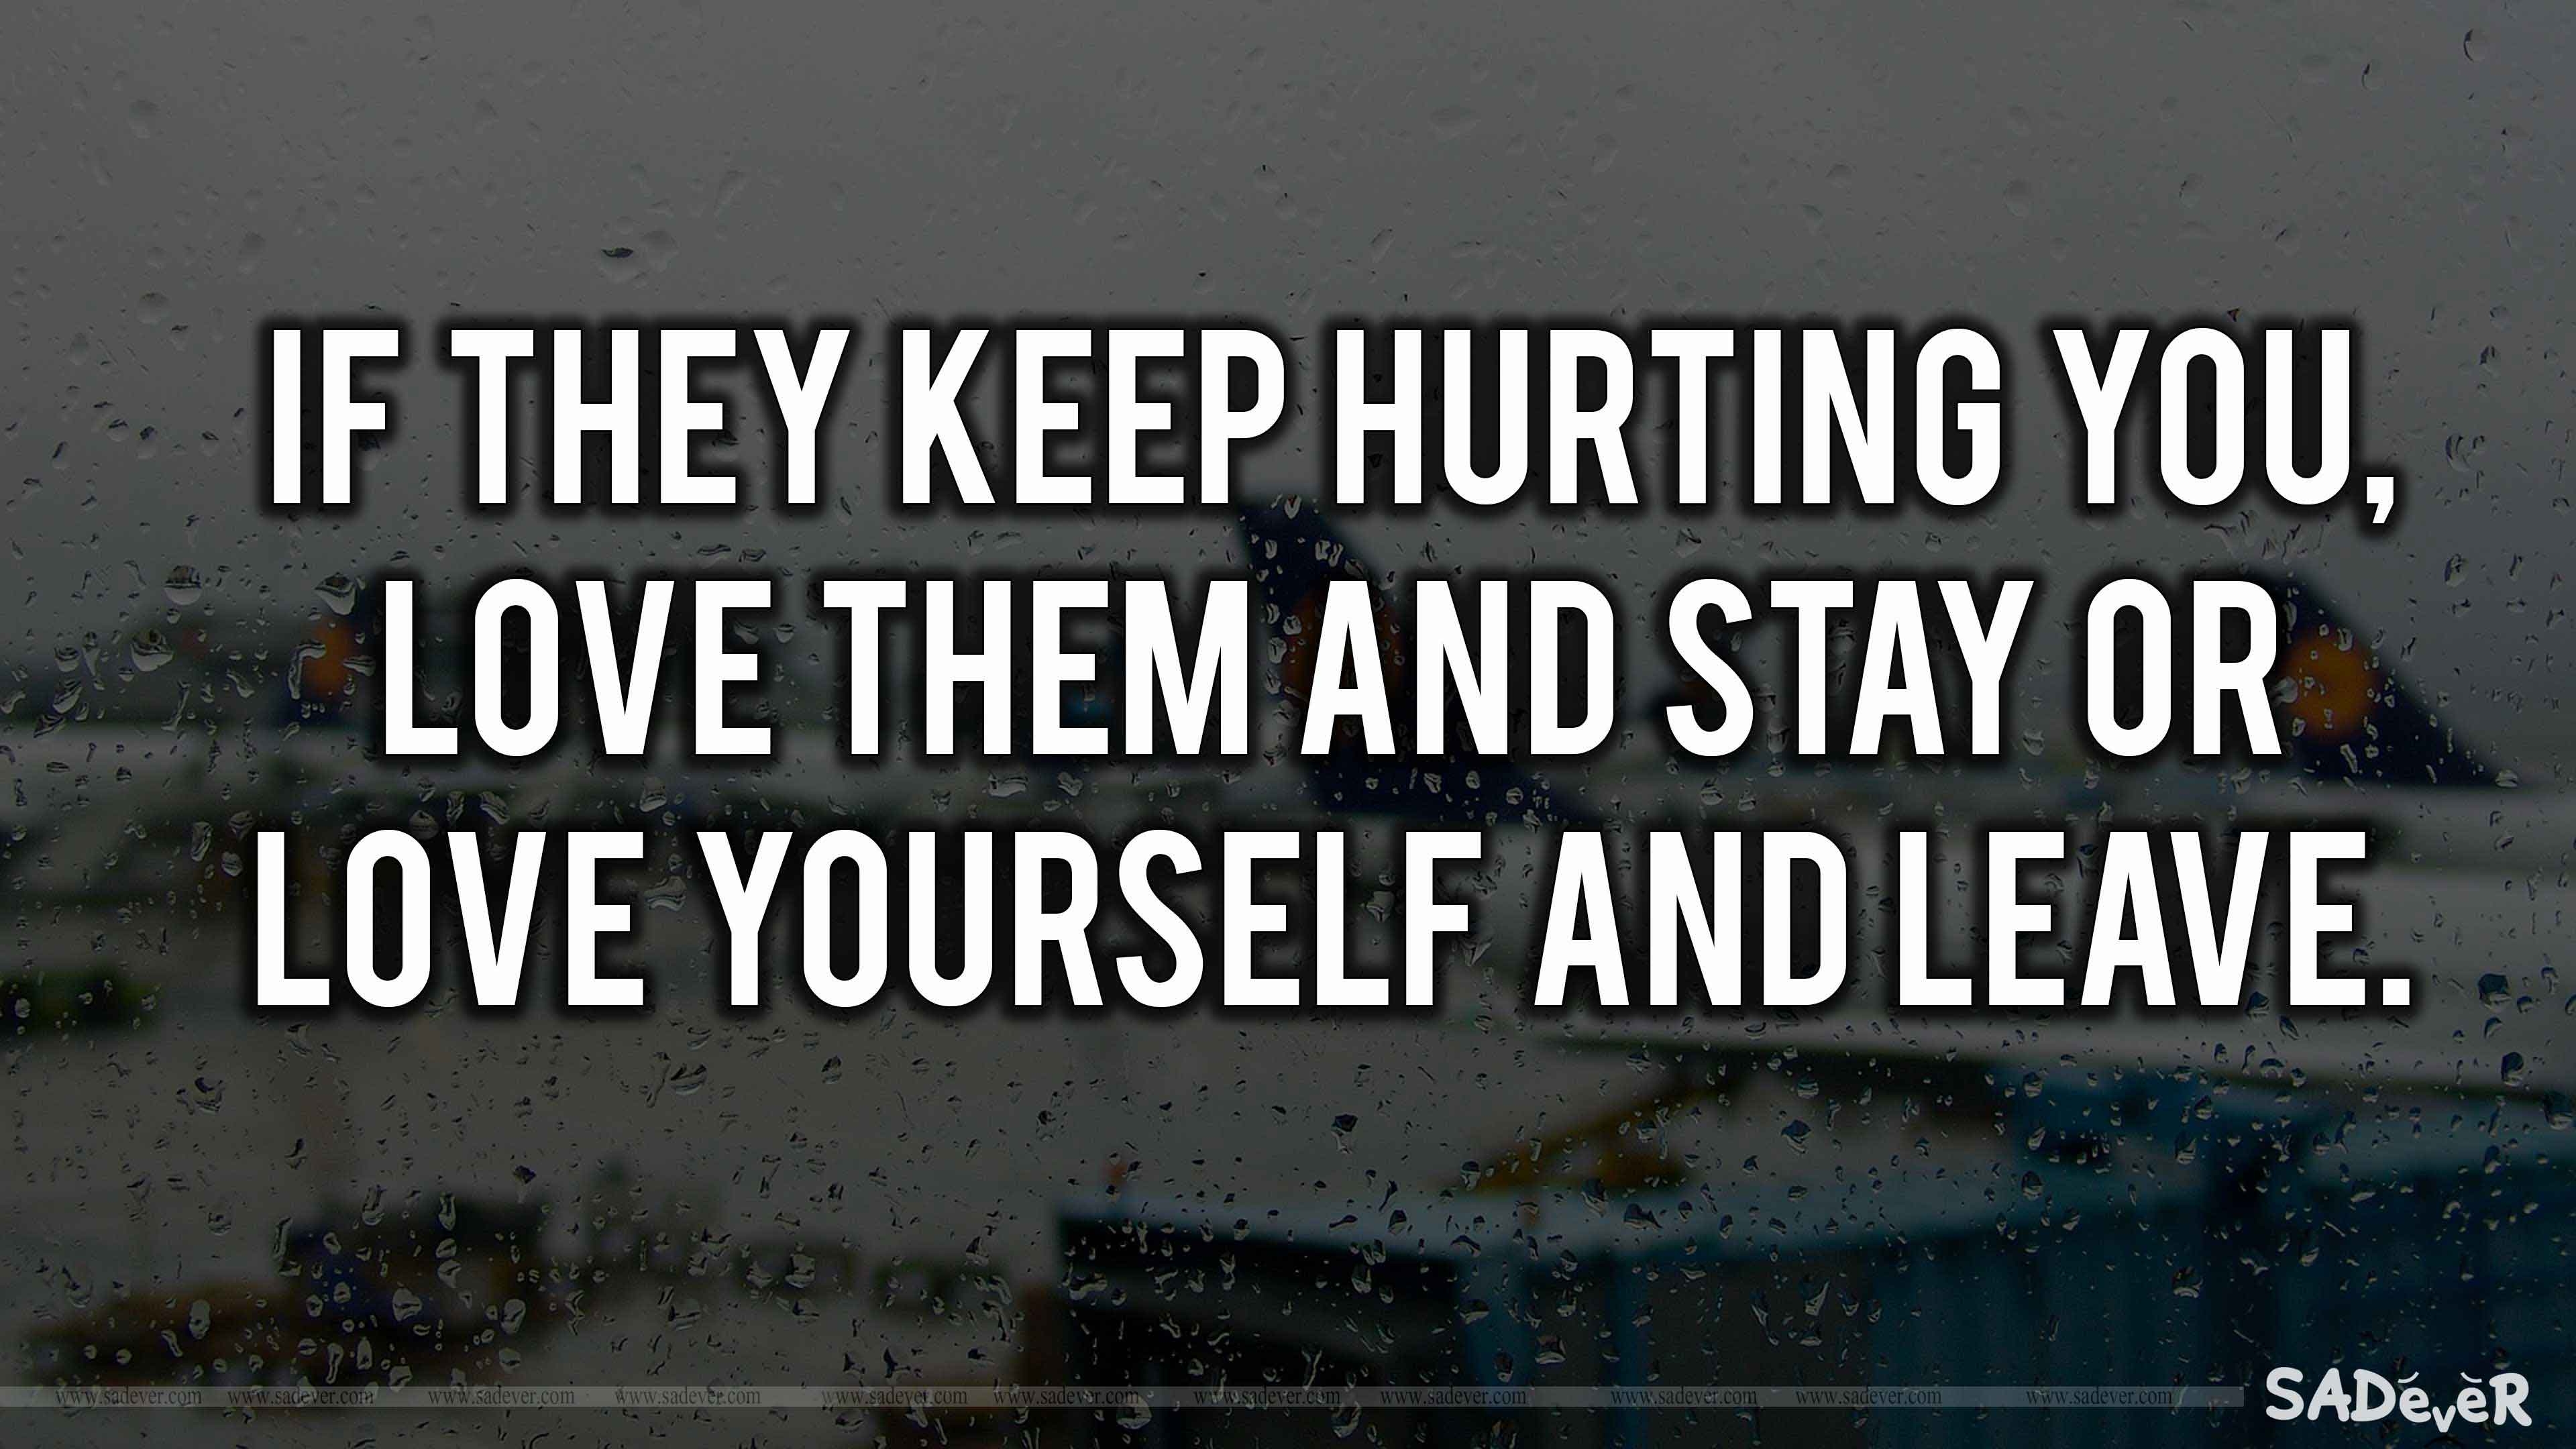 New Image Of Love Hurts Quotes Wallpaper